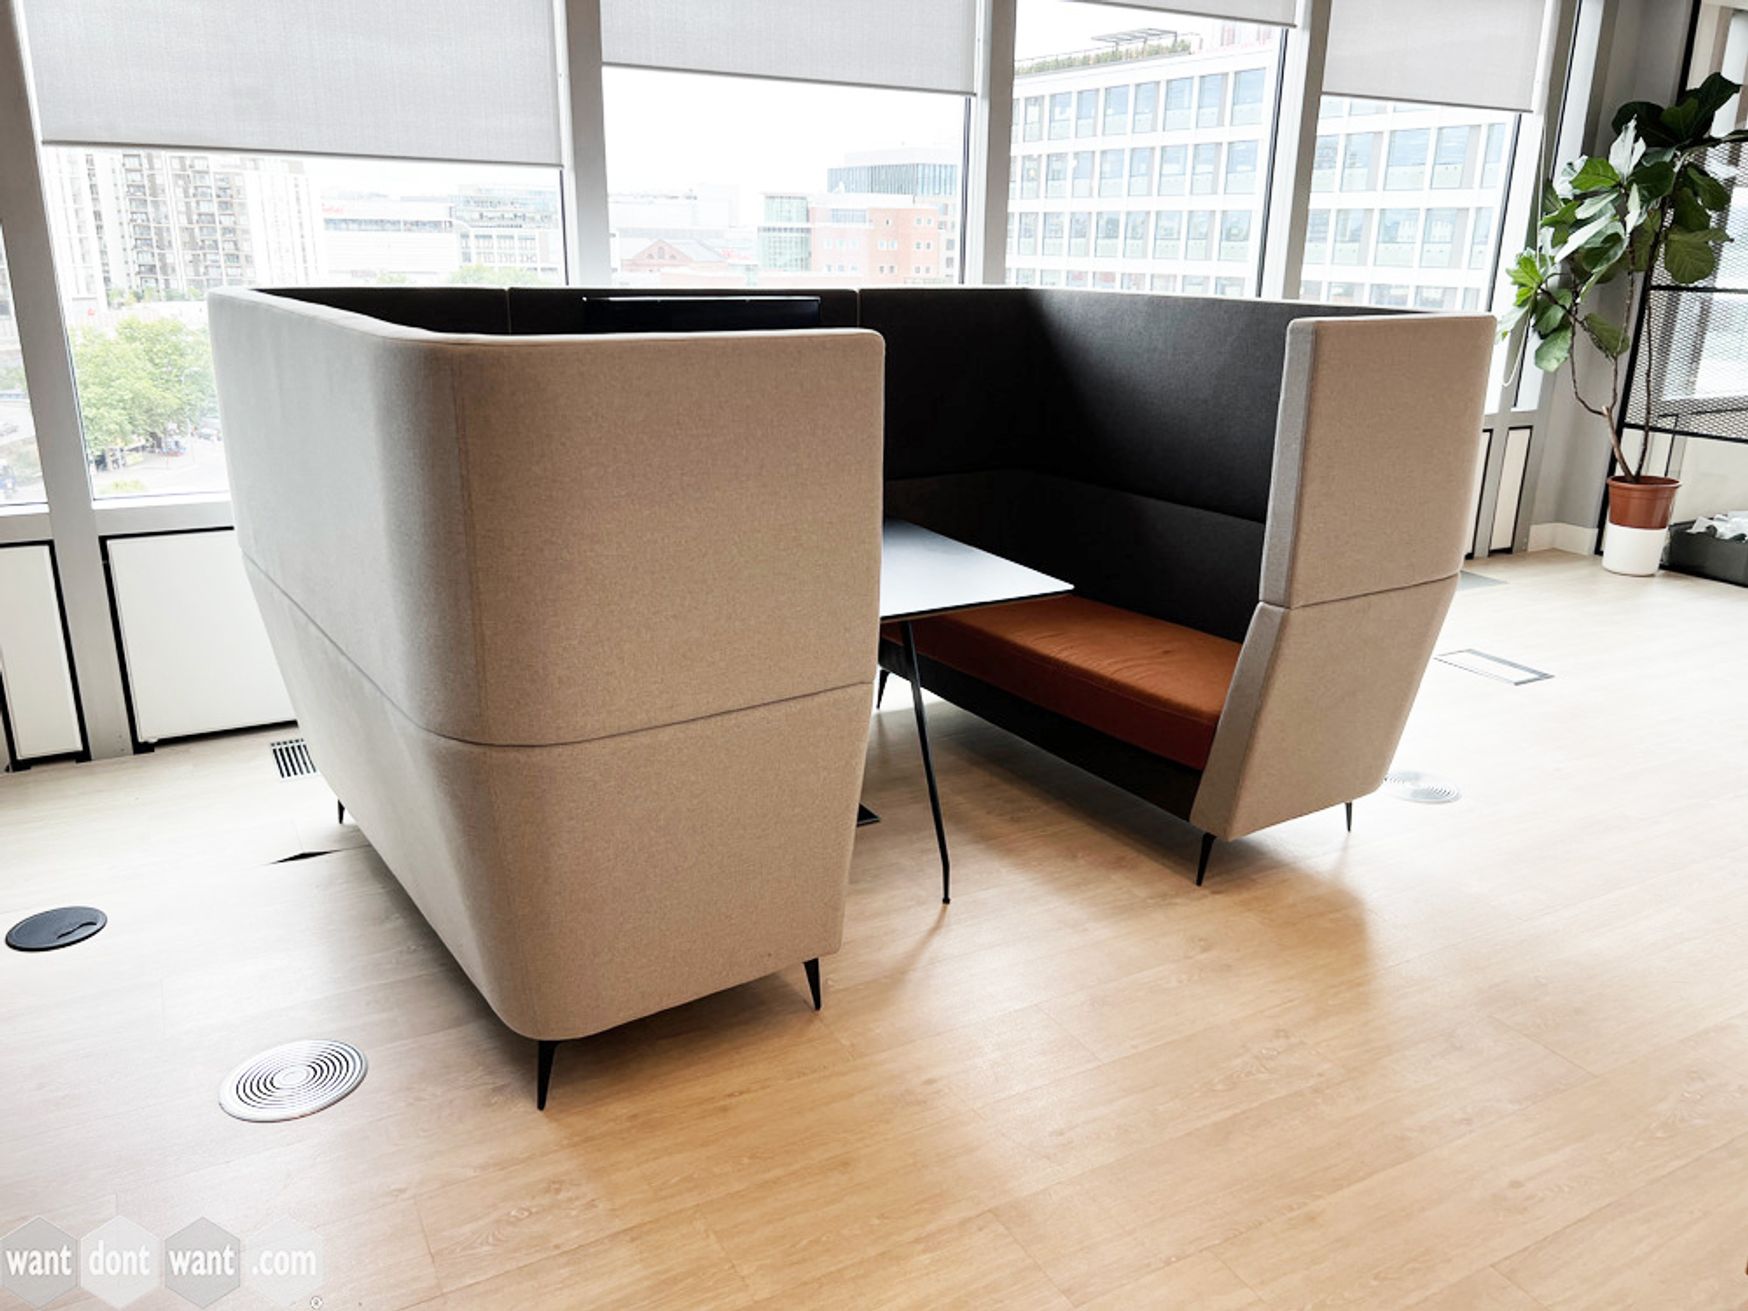 Used Orangebox Cwtch booths with integrated table